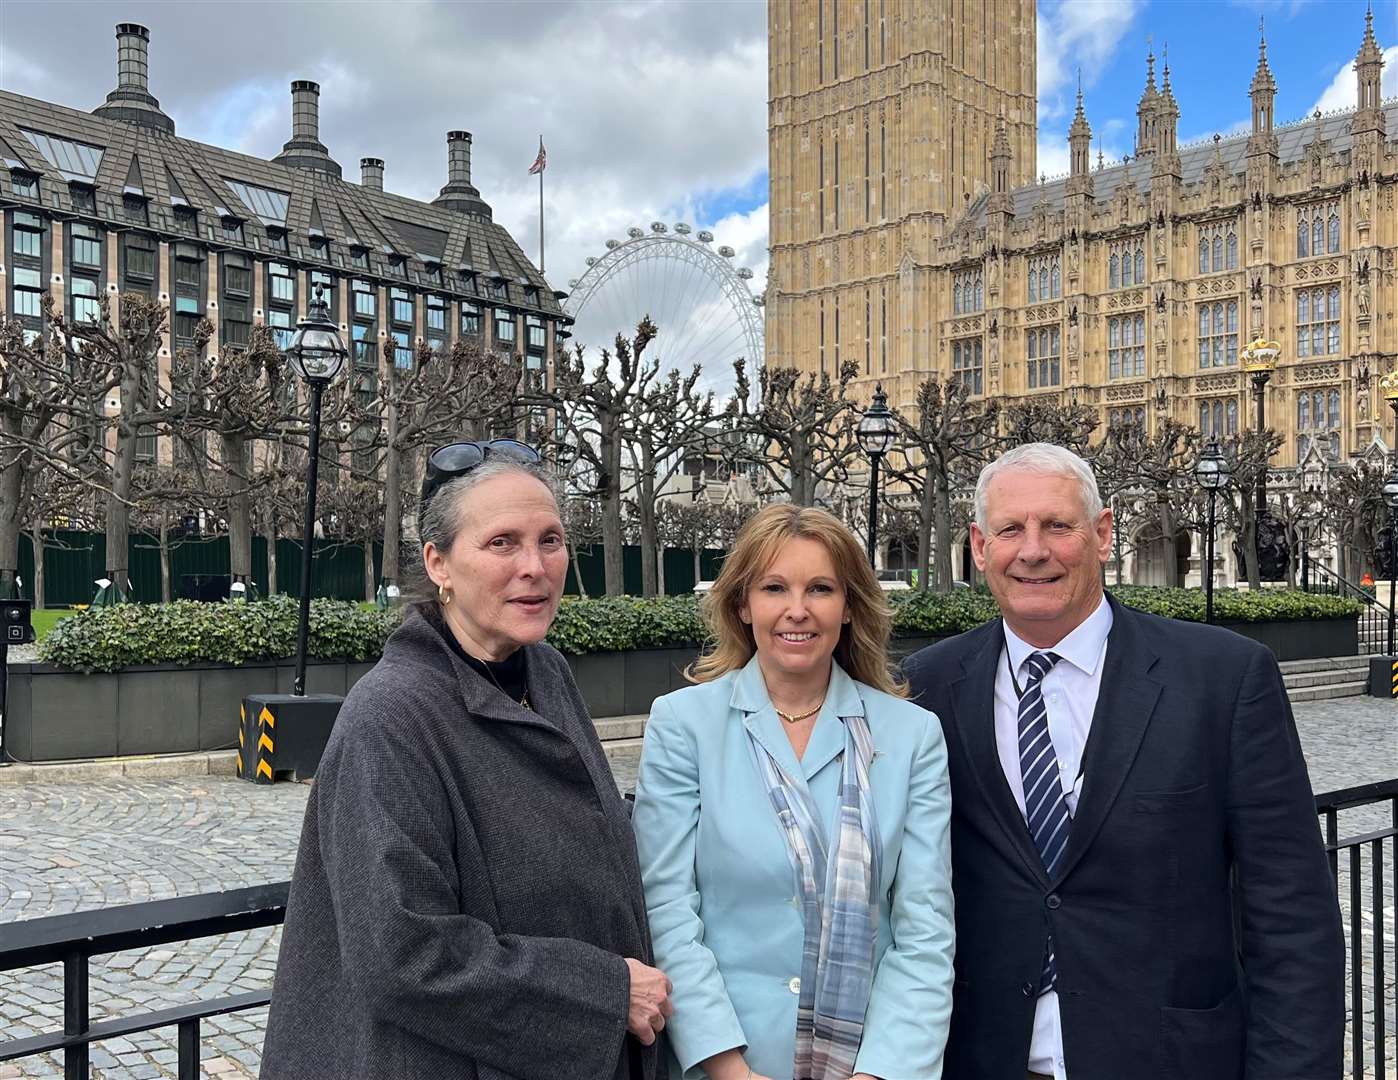 Stephen Horne and his wife Marsha with MP Natalie Elphicke outside the Houses of Parliament. Picture: Office of Natalie Elphicke MP